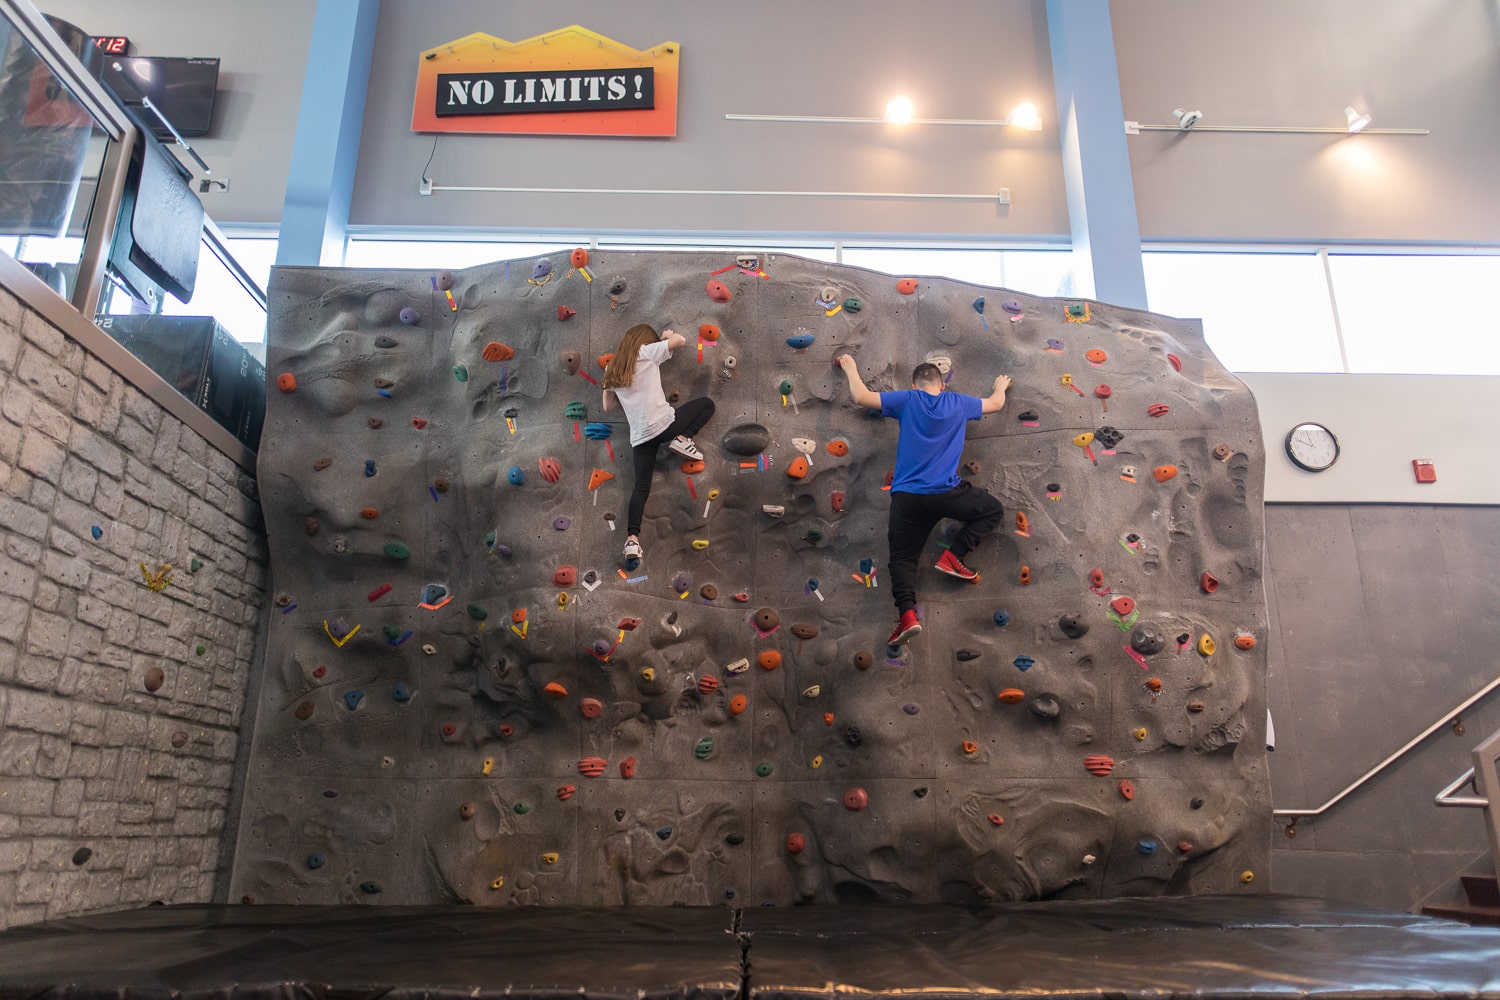 Work together or workout together on the Salem indoor Rock climbing wall